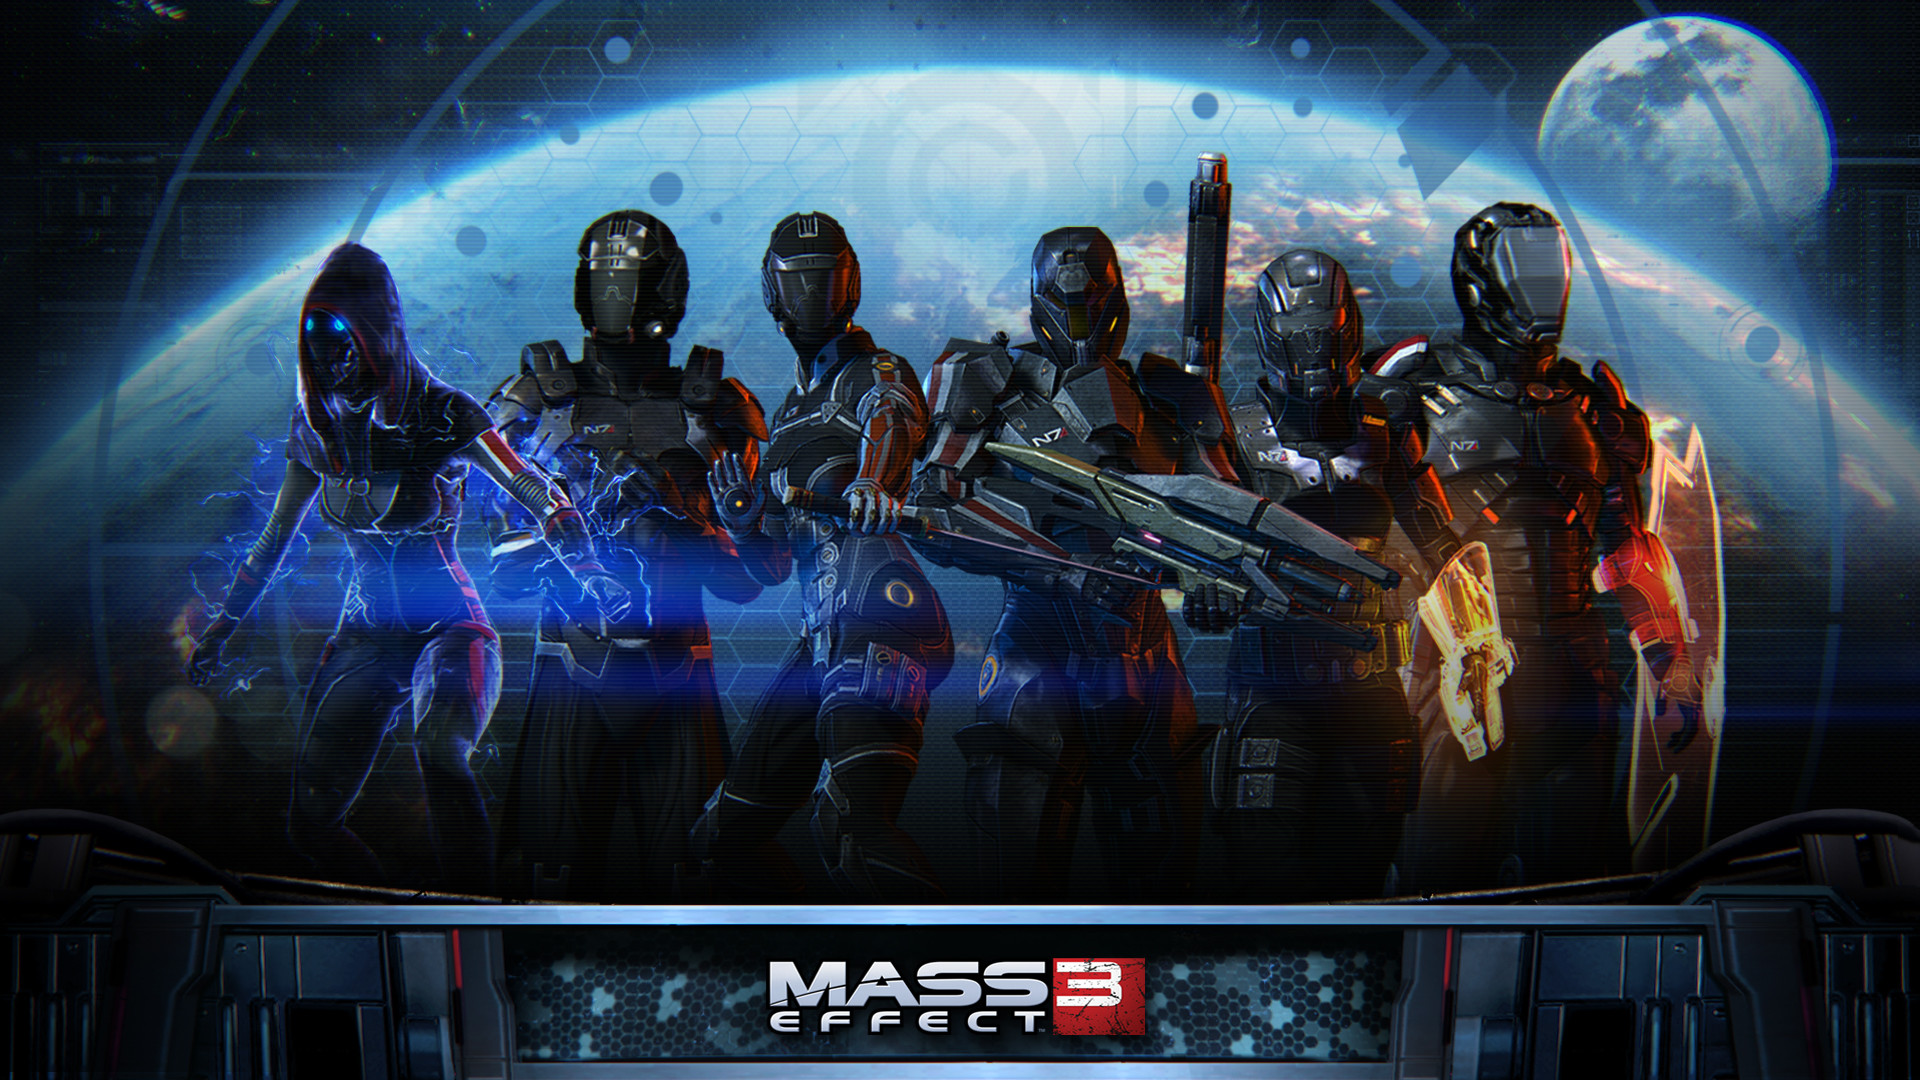 1920x1080 Mass Effect 3 Earth Multiplayer DLC Details Revealed